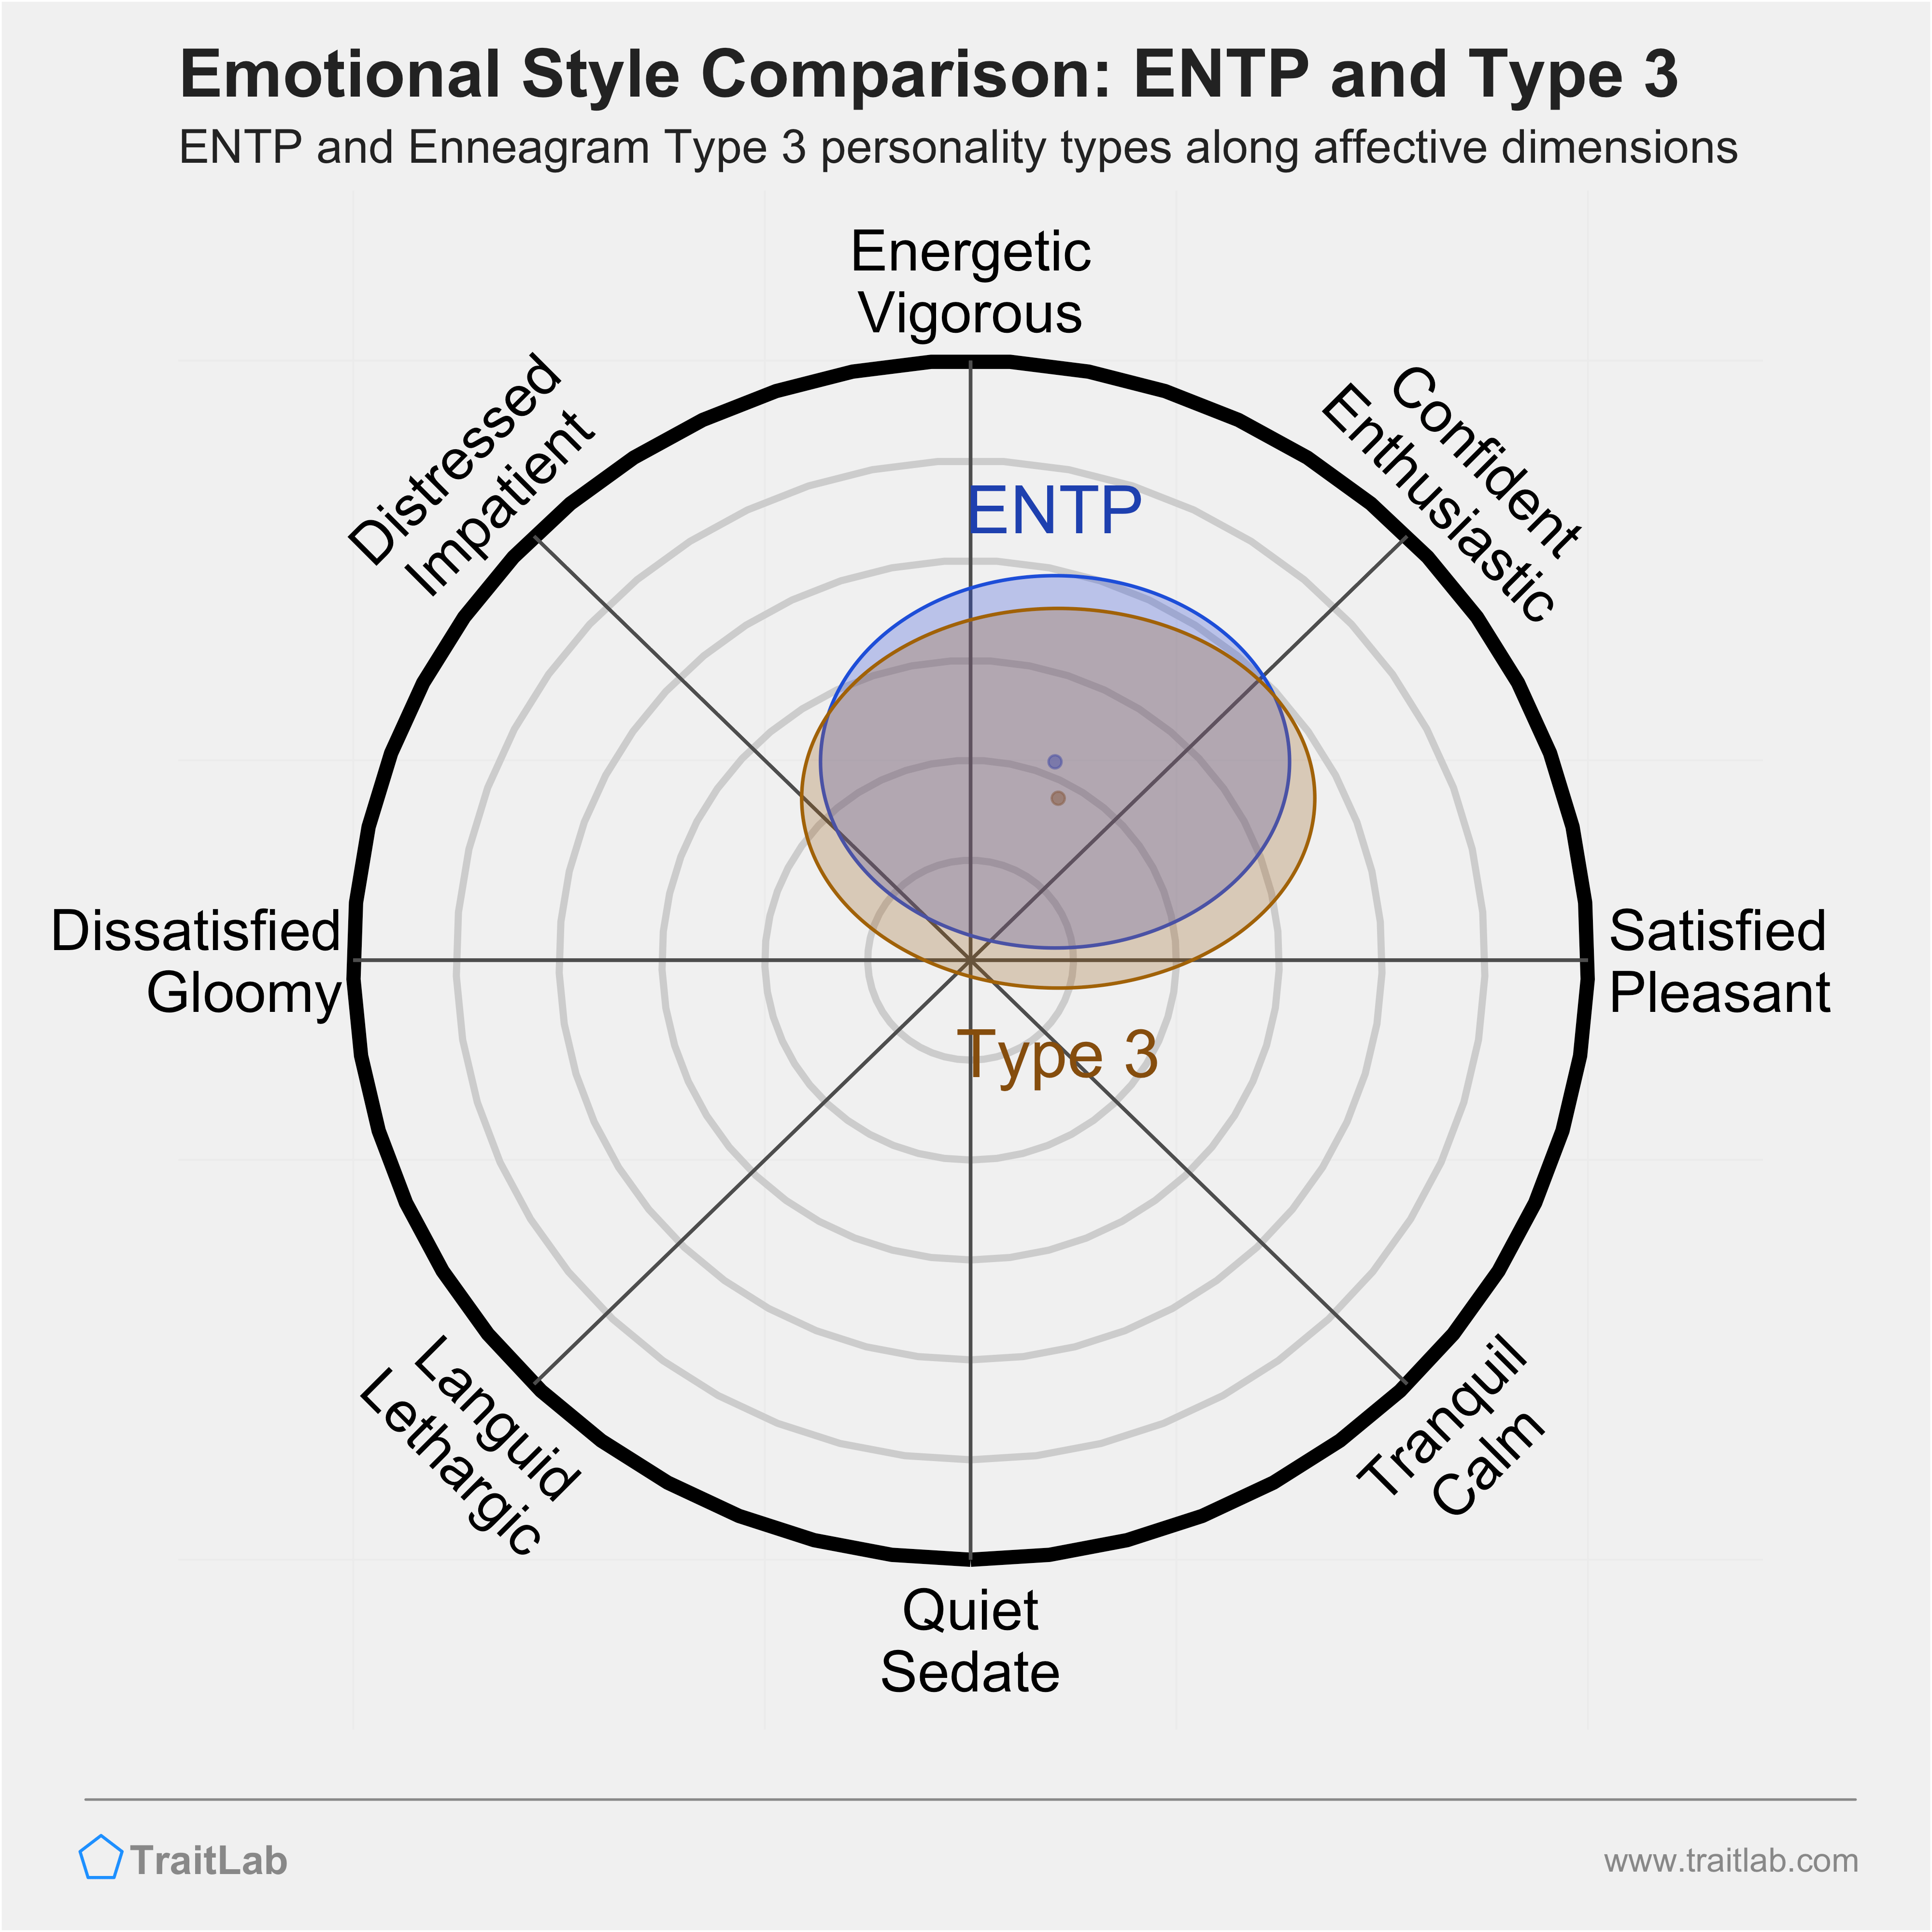 ENTP and Type 3 comparison across emotional (affective) dimensions